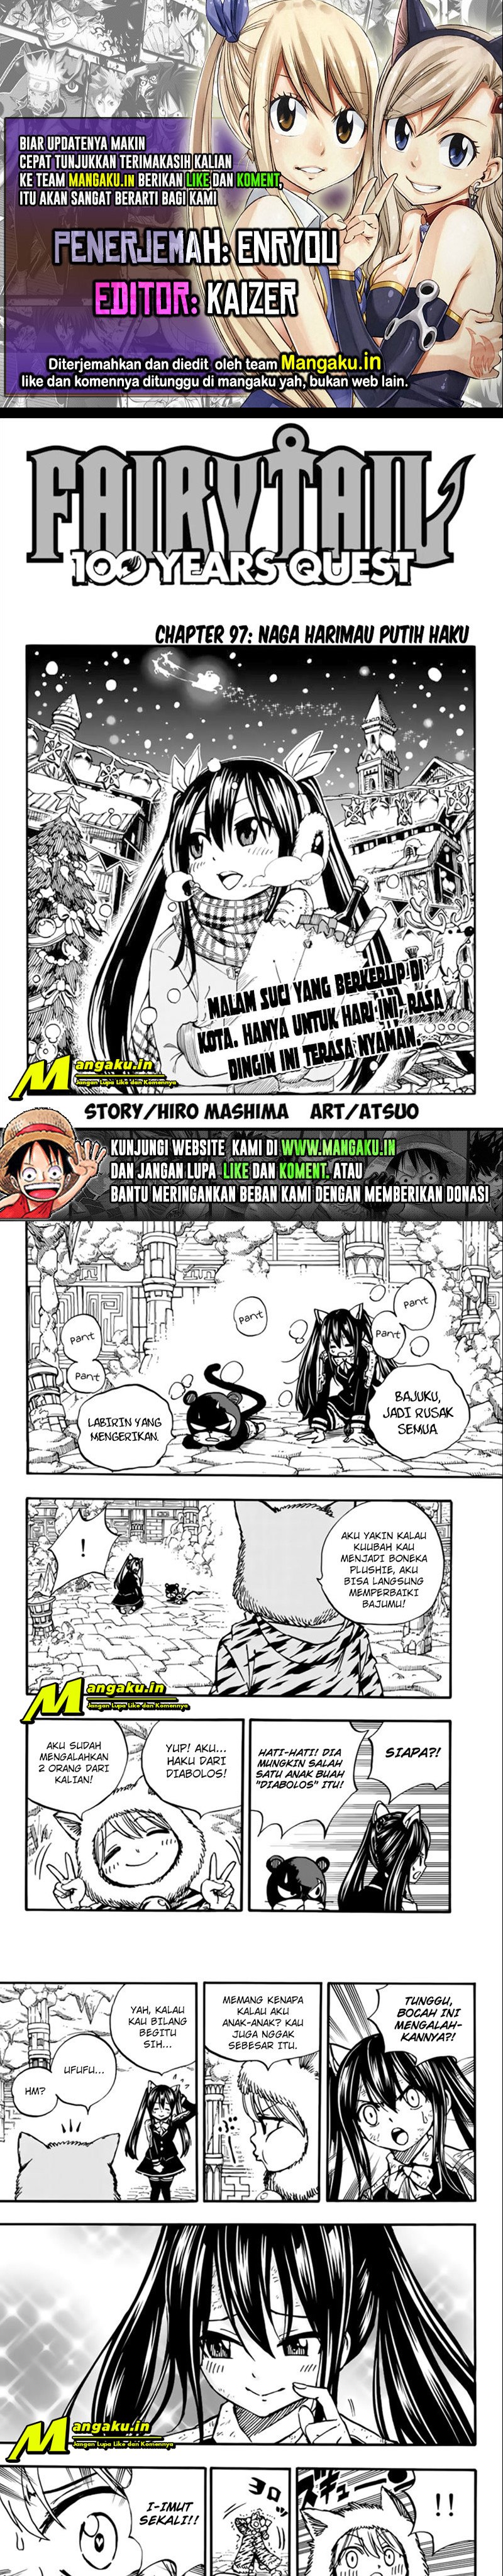 Fairy Tail: 100 Years Quest Chapter 97